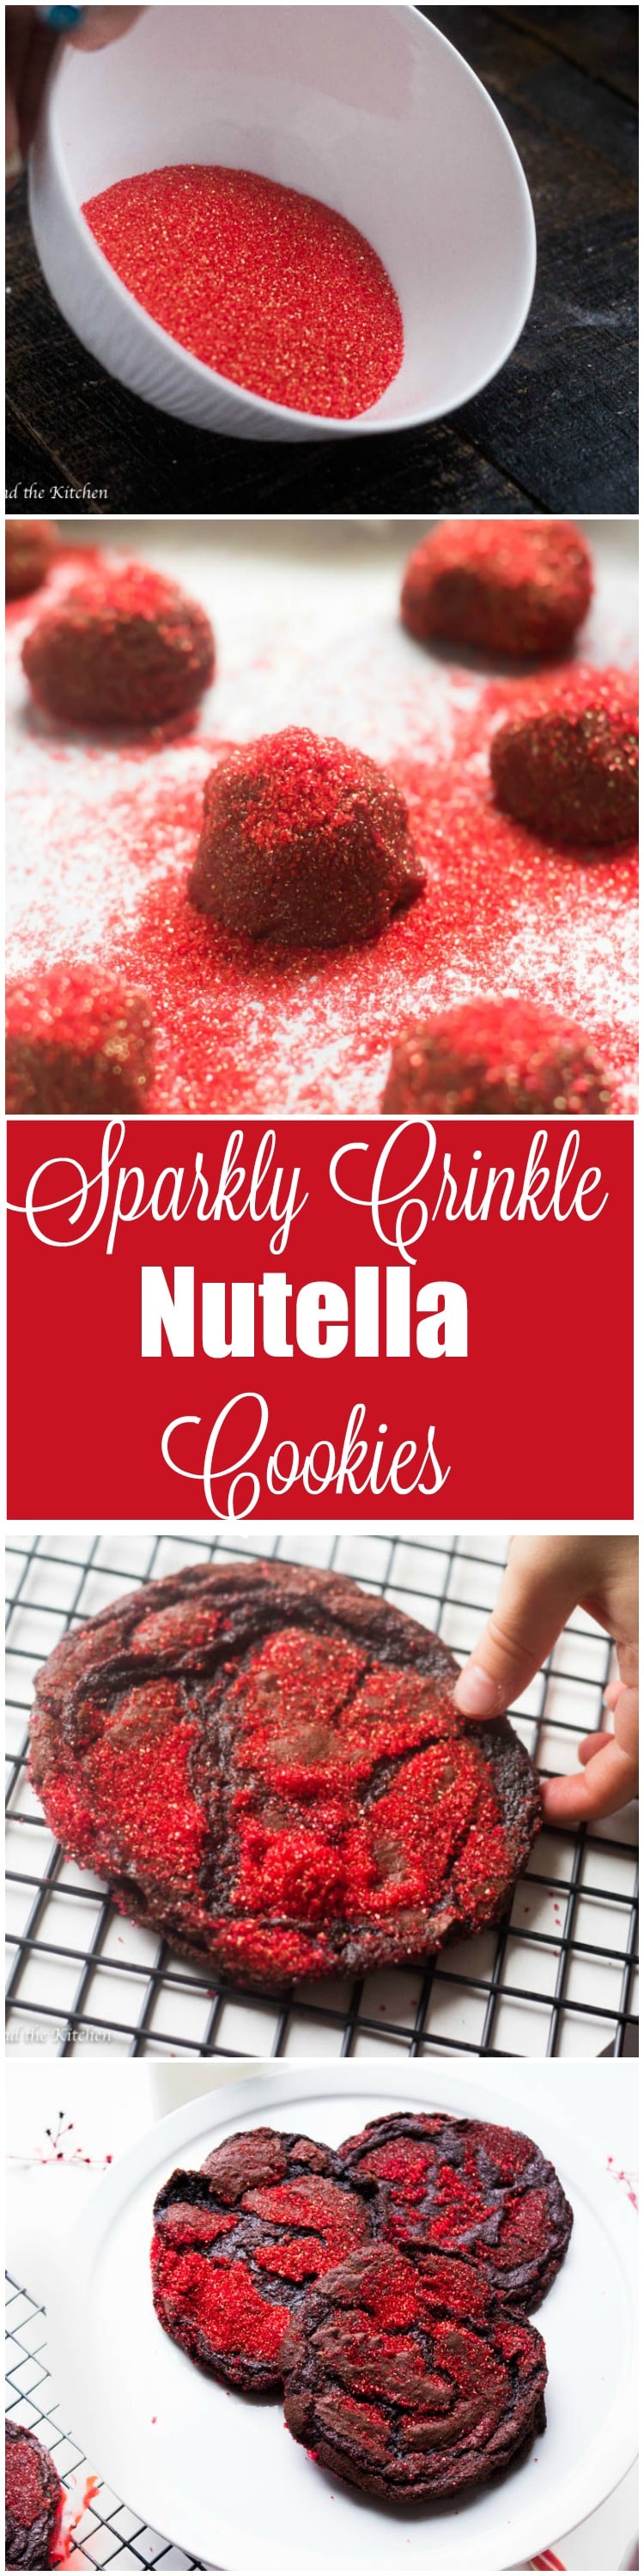 Meet the one bowl Chocolate Nutella Cookies that is a cinch to make but dazzles everyone! It is the ultimate holiday cookie filled with chocolate and Nutella. Gorgeous sparkles and delicate crinkles make this cookie a show stopper for any holiday that needs a bit of dazzle